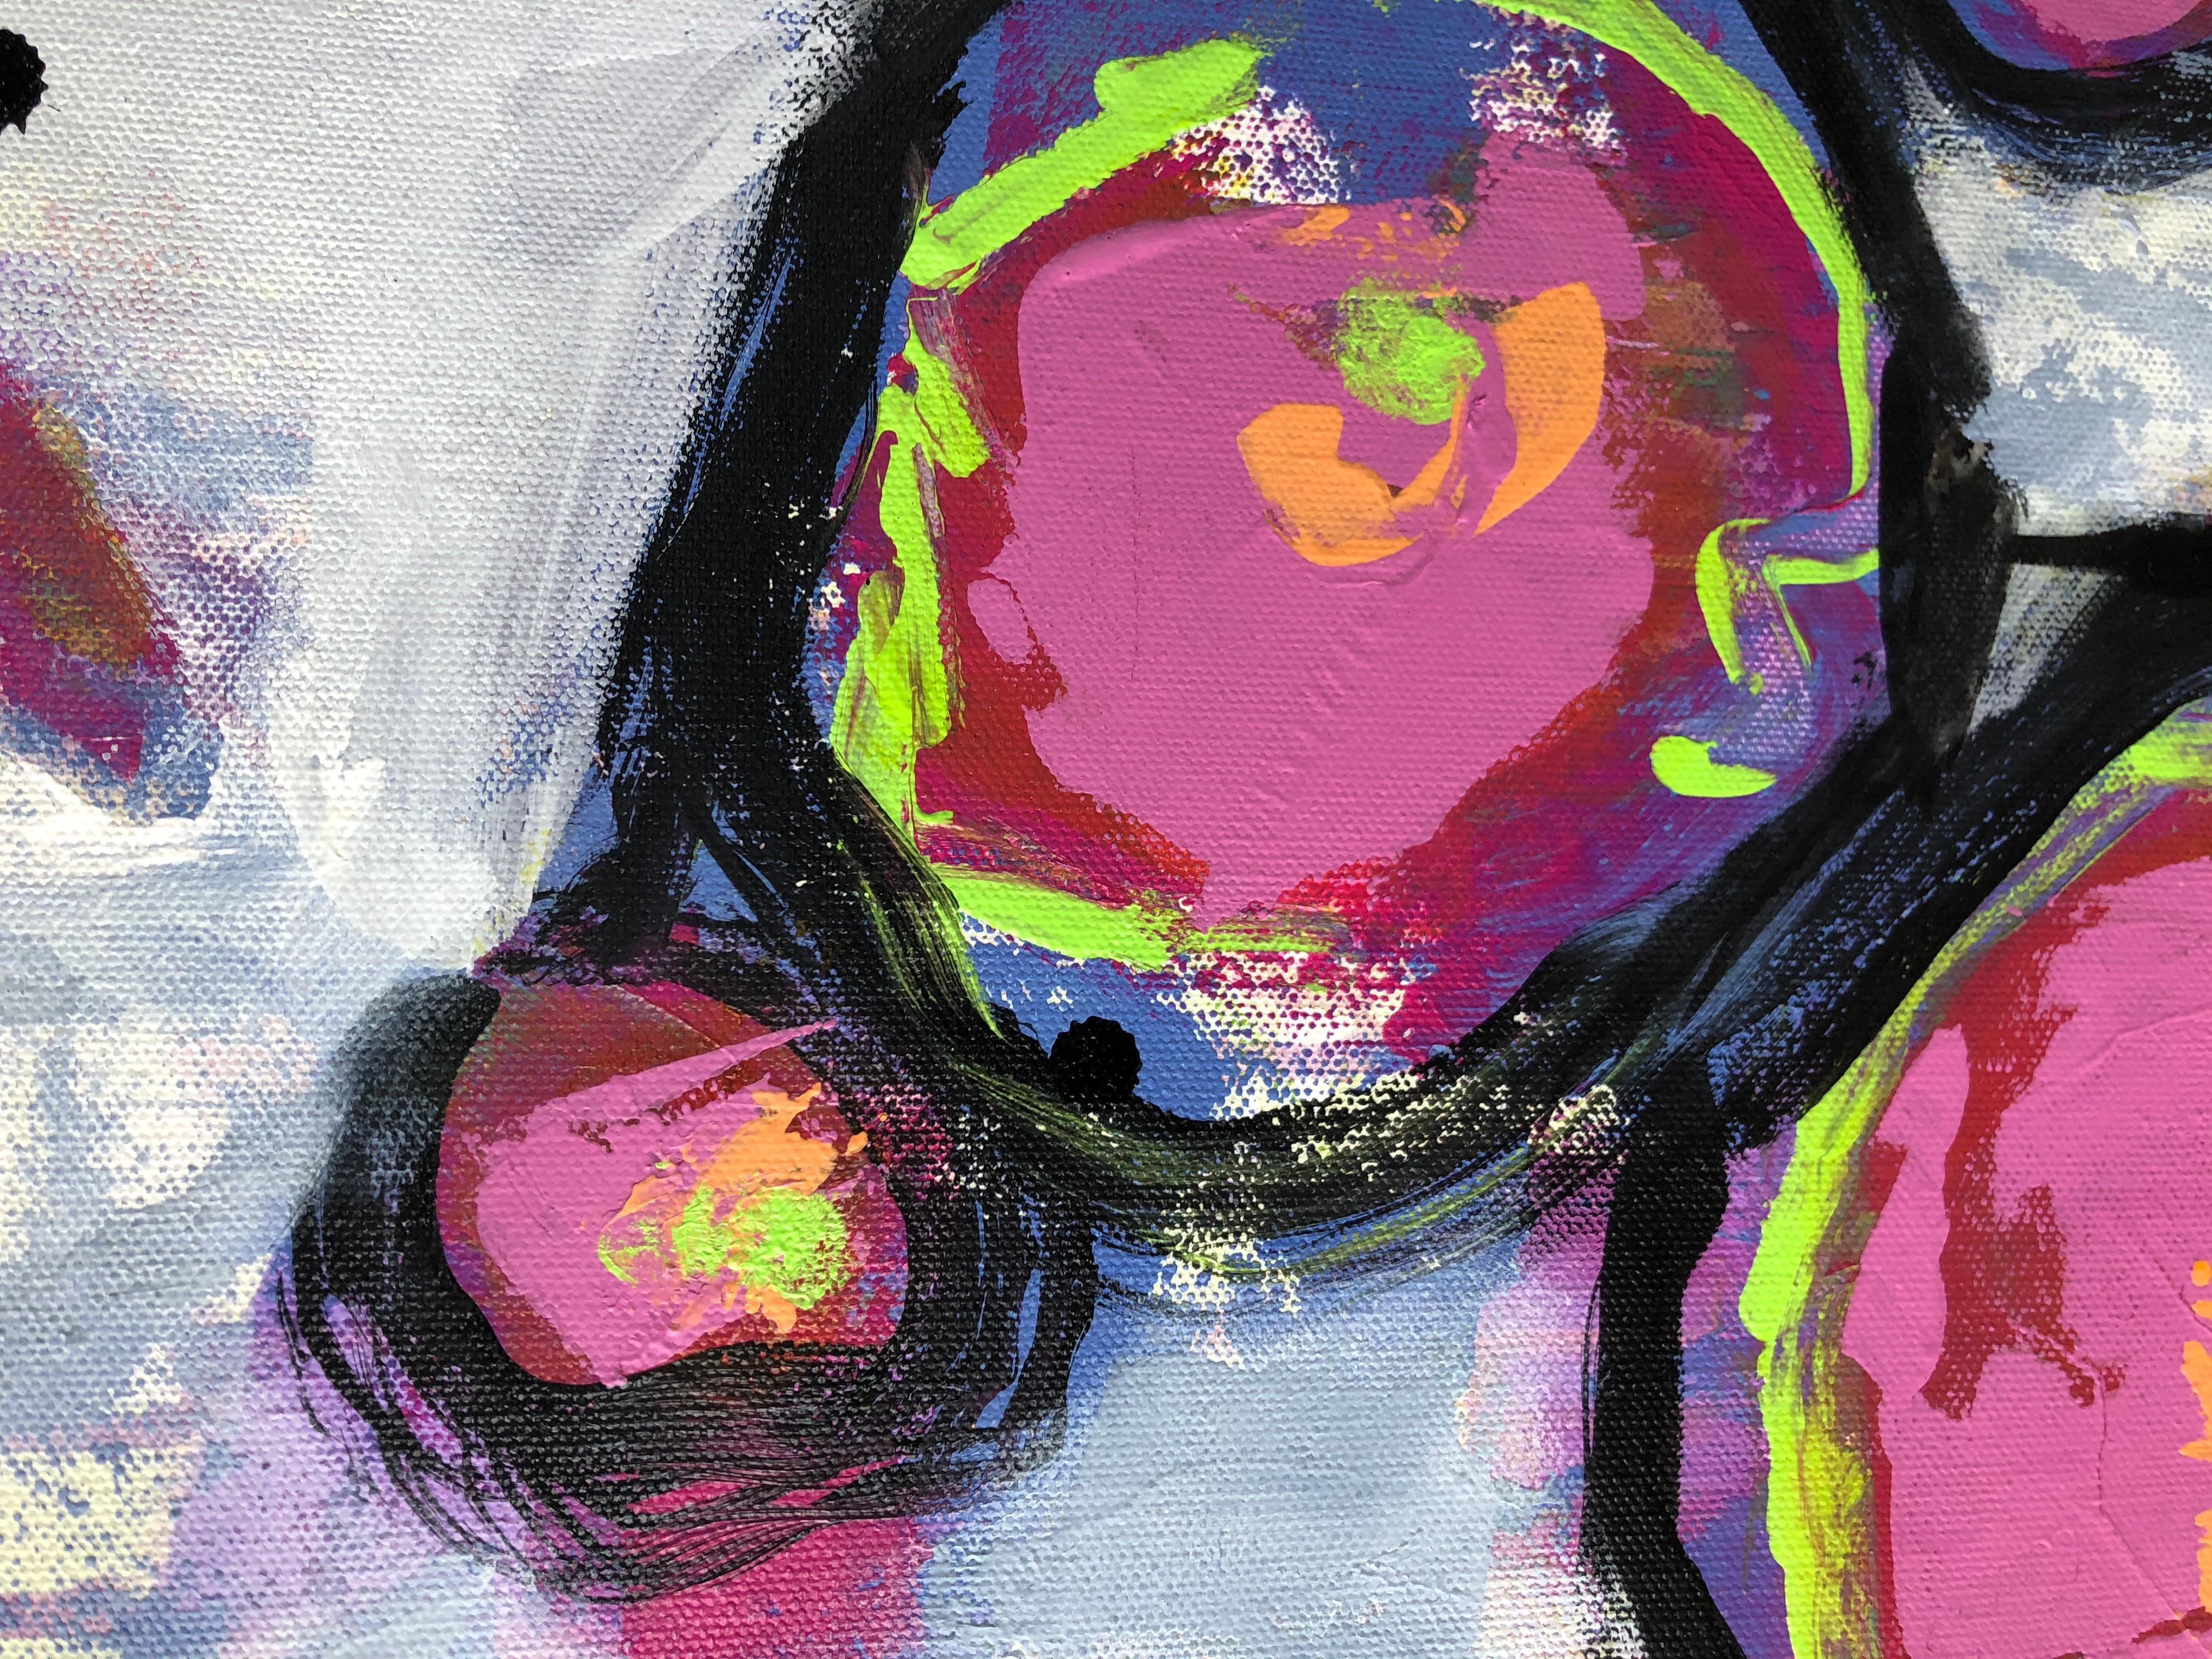 <p>Artist Comments<br />Abstract spring flowers created in Pat Forbes's signature modernist style. Lively blossoms in strokes of pink, red, purple, orange and green seemingly float on a lavender-grey background. 